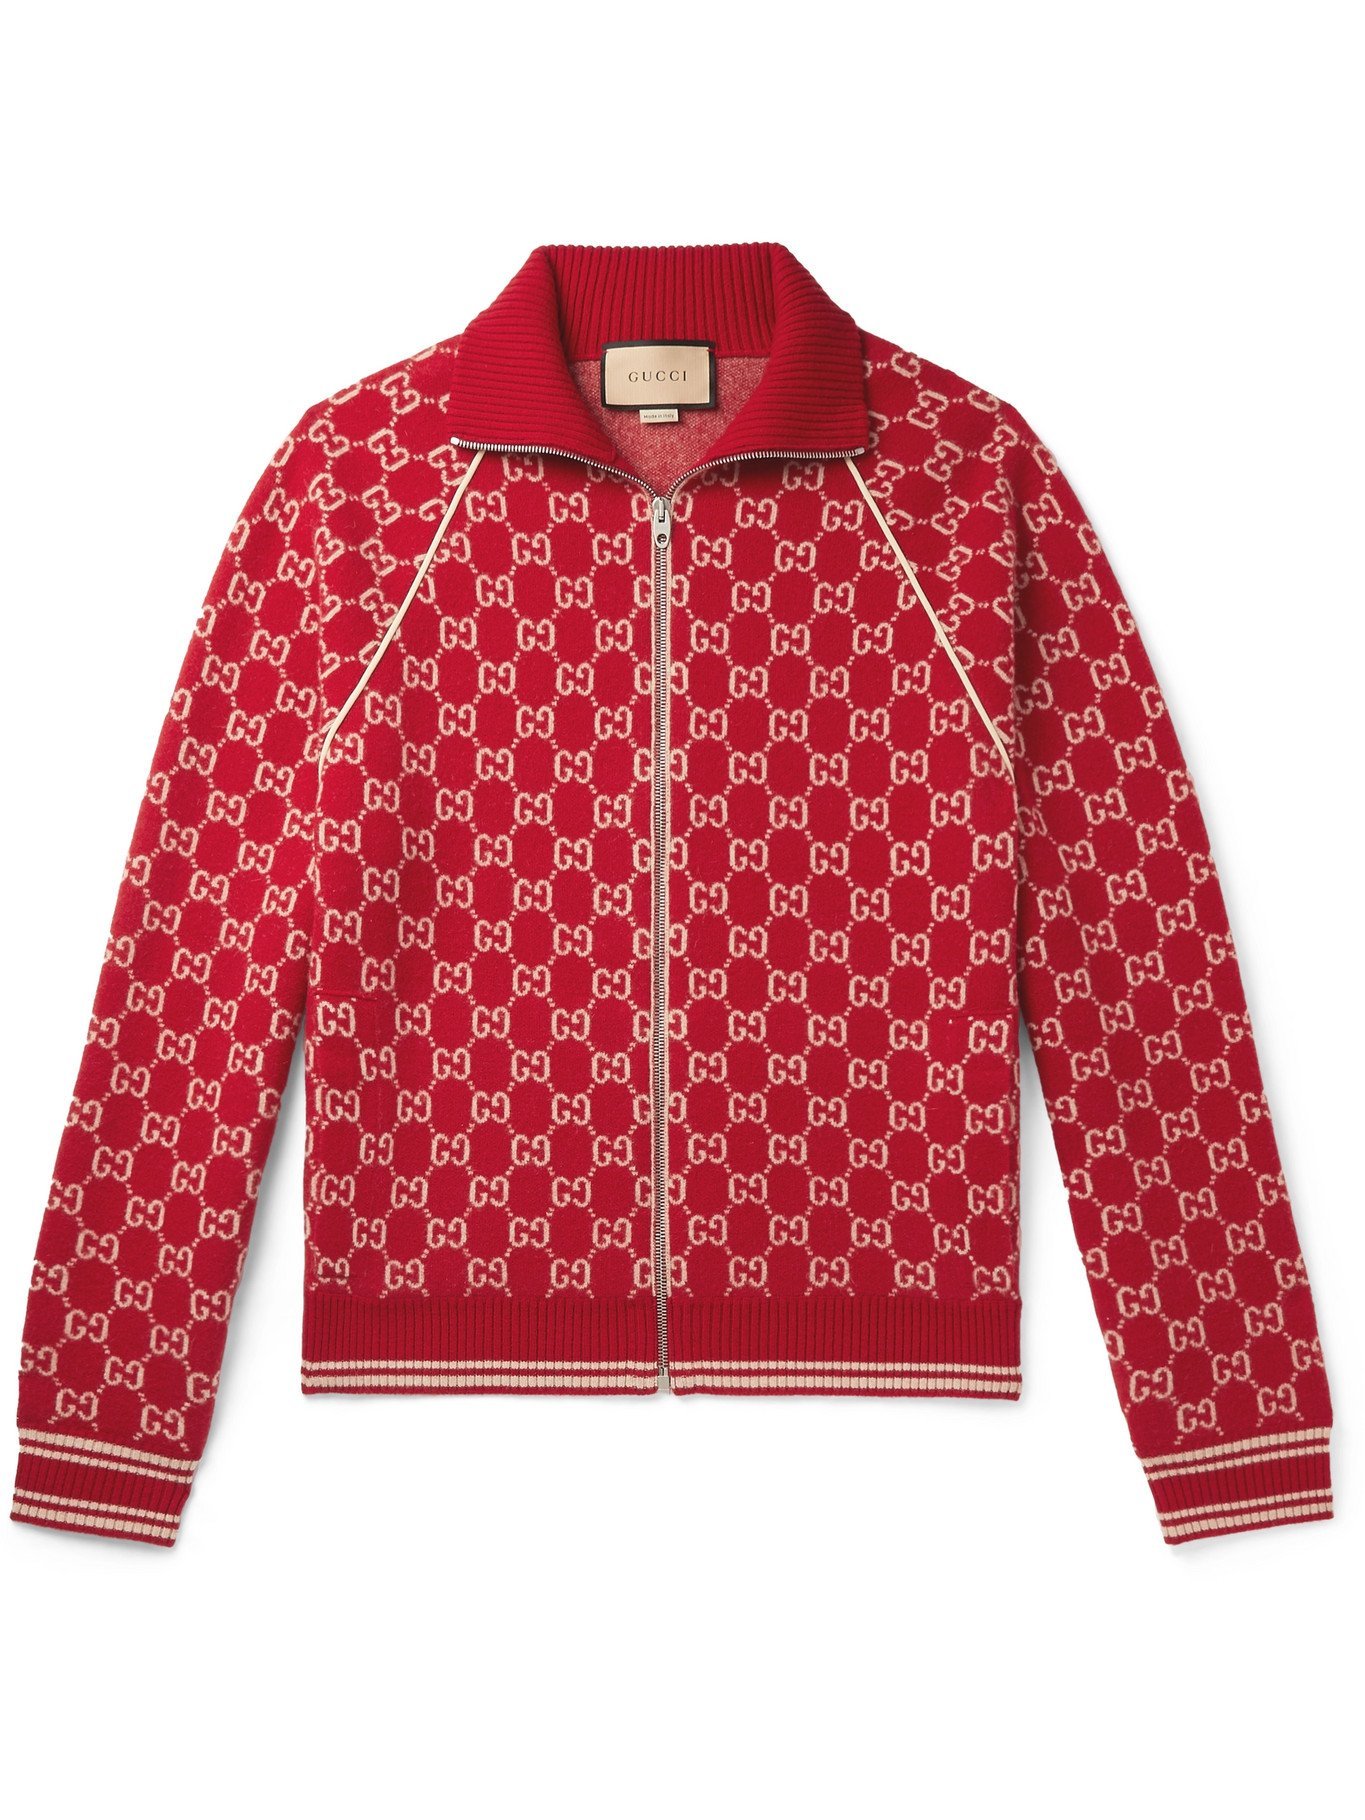 GUCCI - Logo-Intarsia Wool and Cashmere-Blend Bomber Jacket - Red Gucci